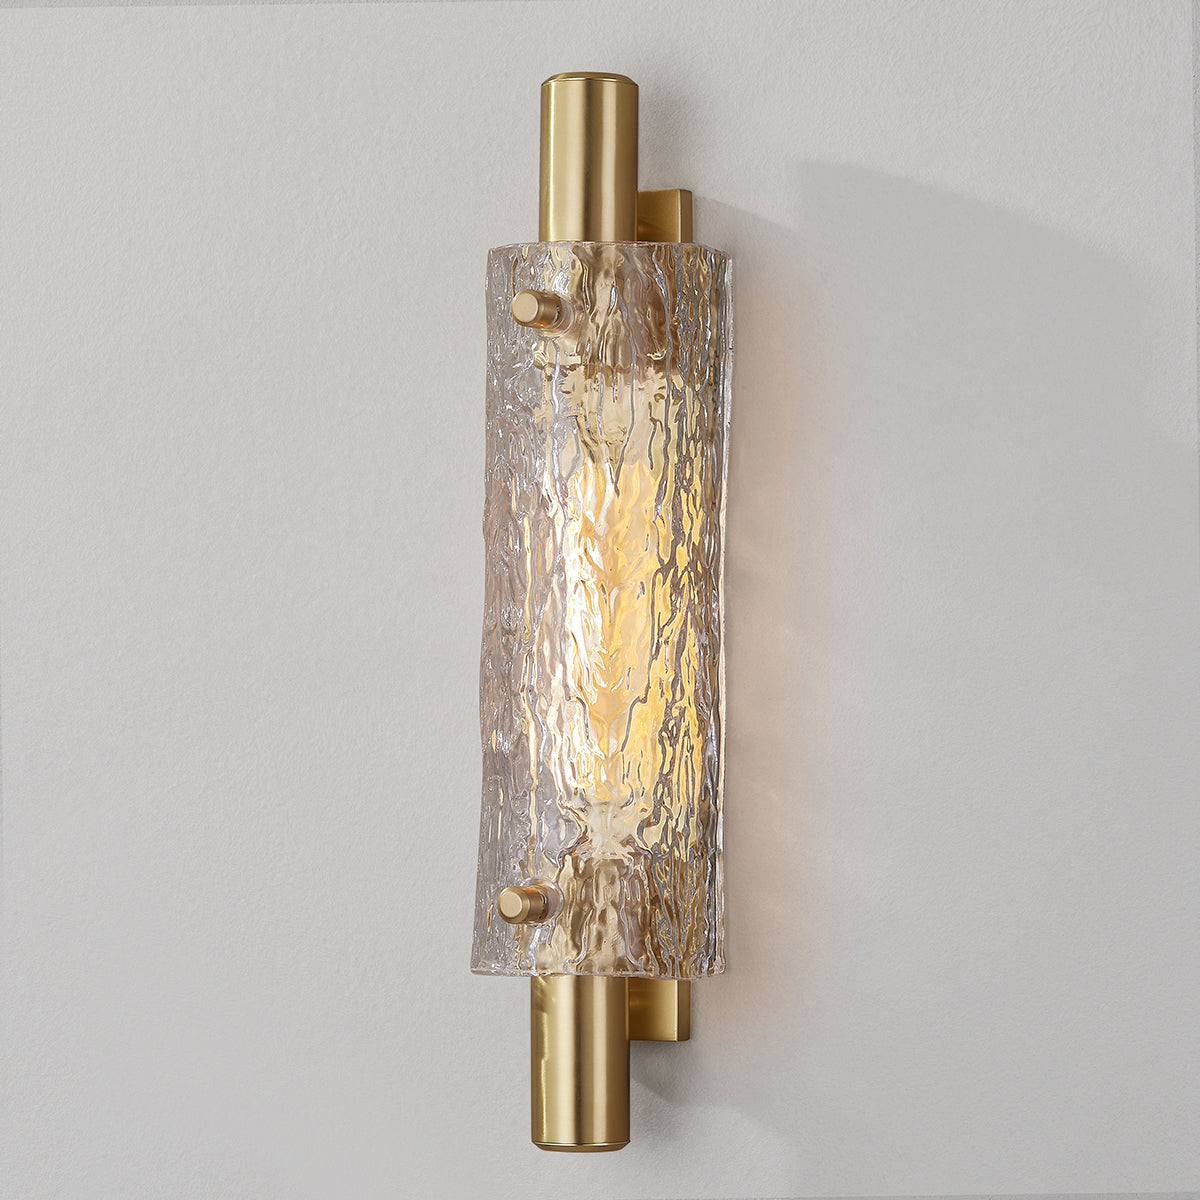 Steel Frame with Clear Piastra Glass Shade Wall Sconce